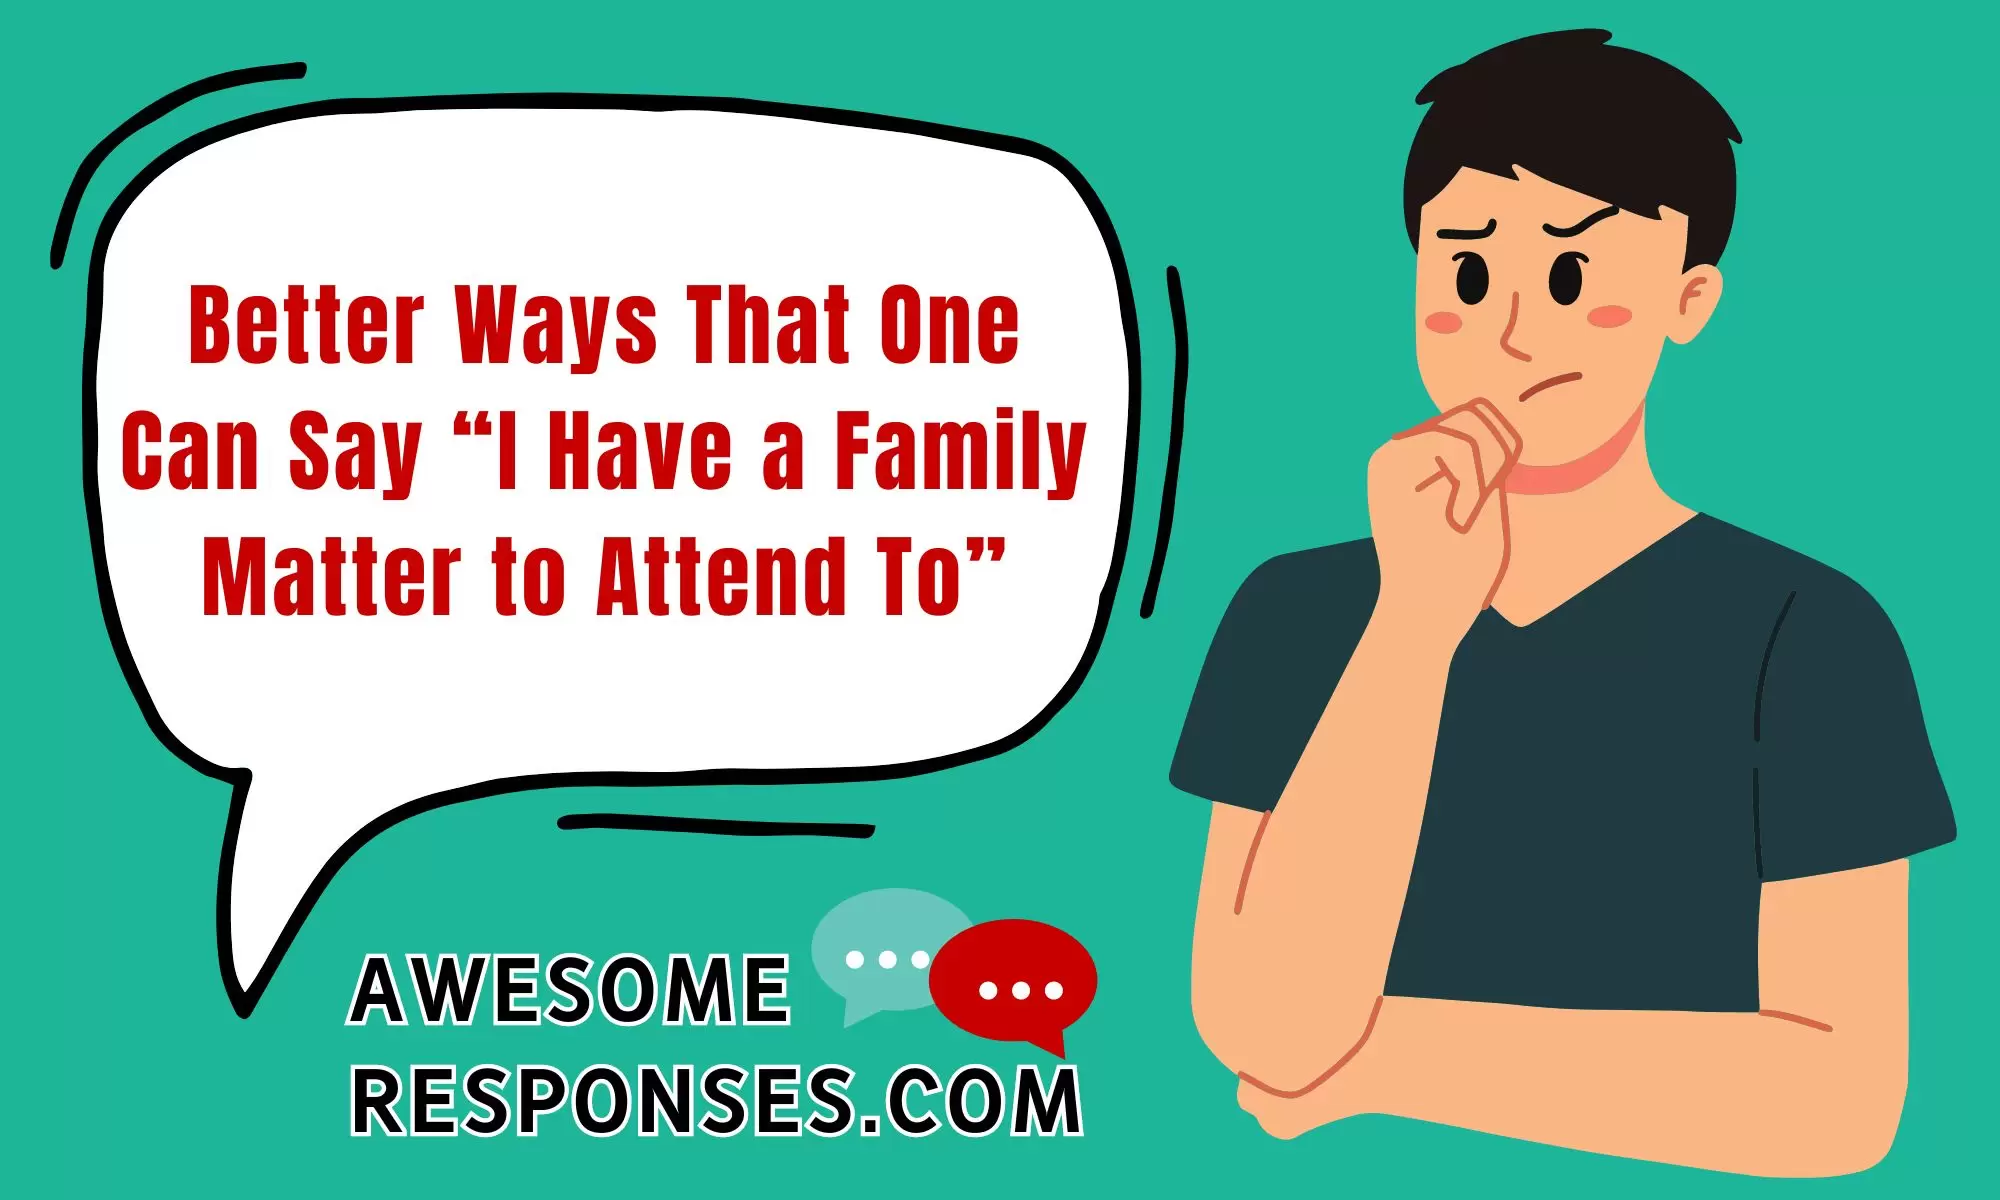 Better Ways That One Can Say “I Have a Family Matter to Attend To”